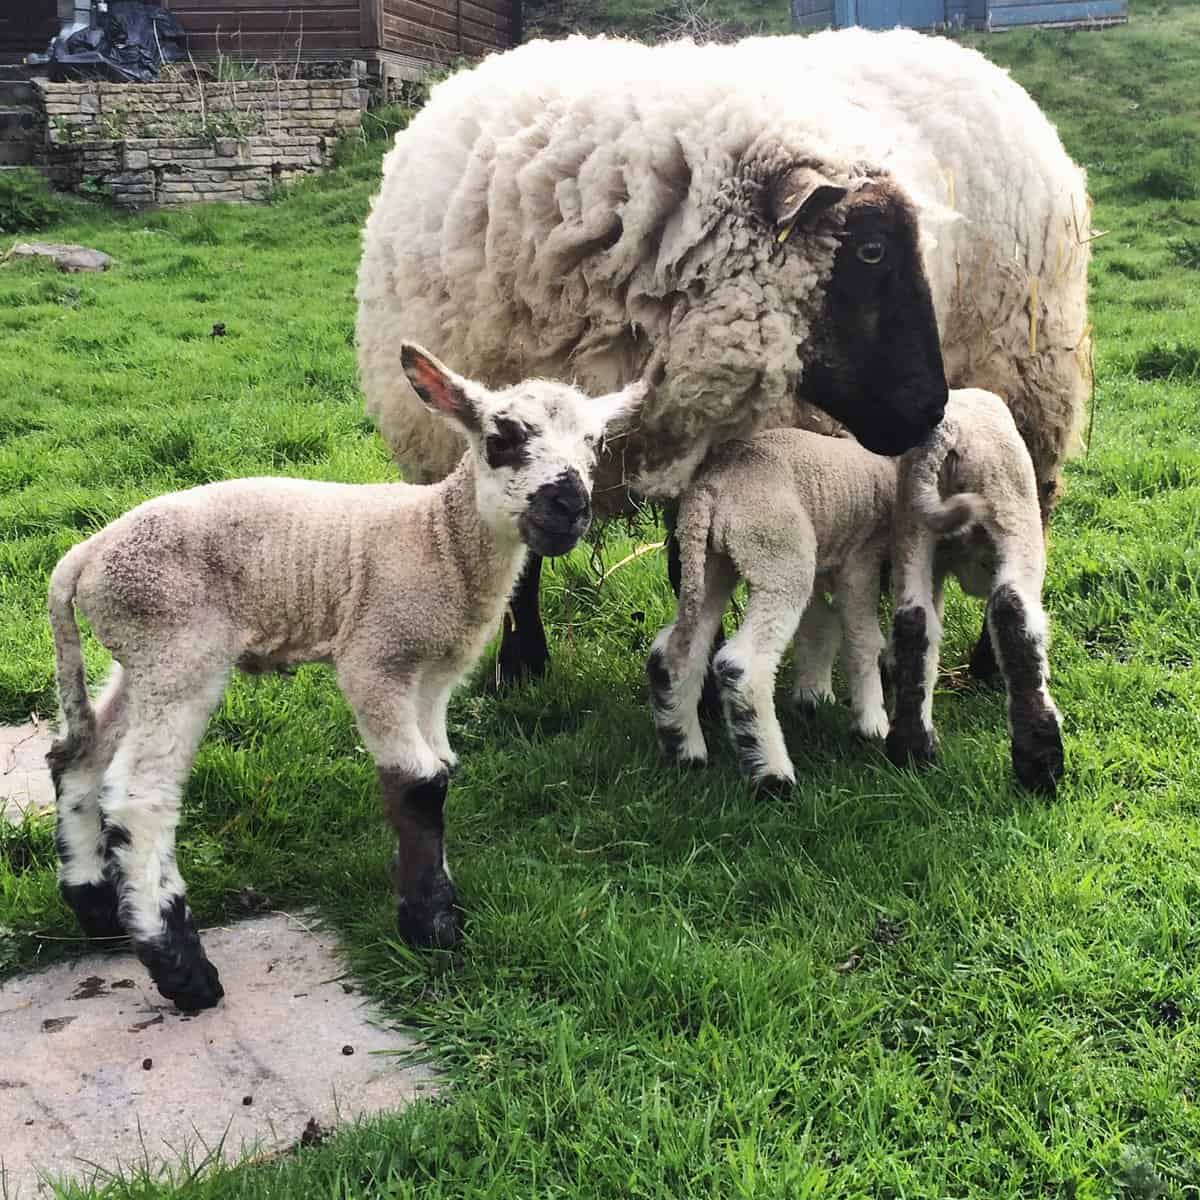 Letting the triplets out of the shed and onto the grass